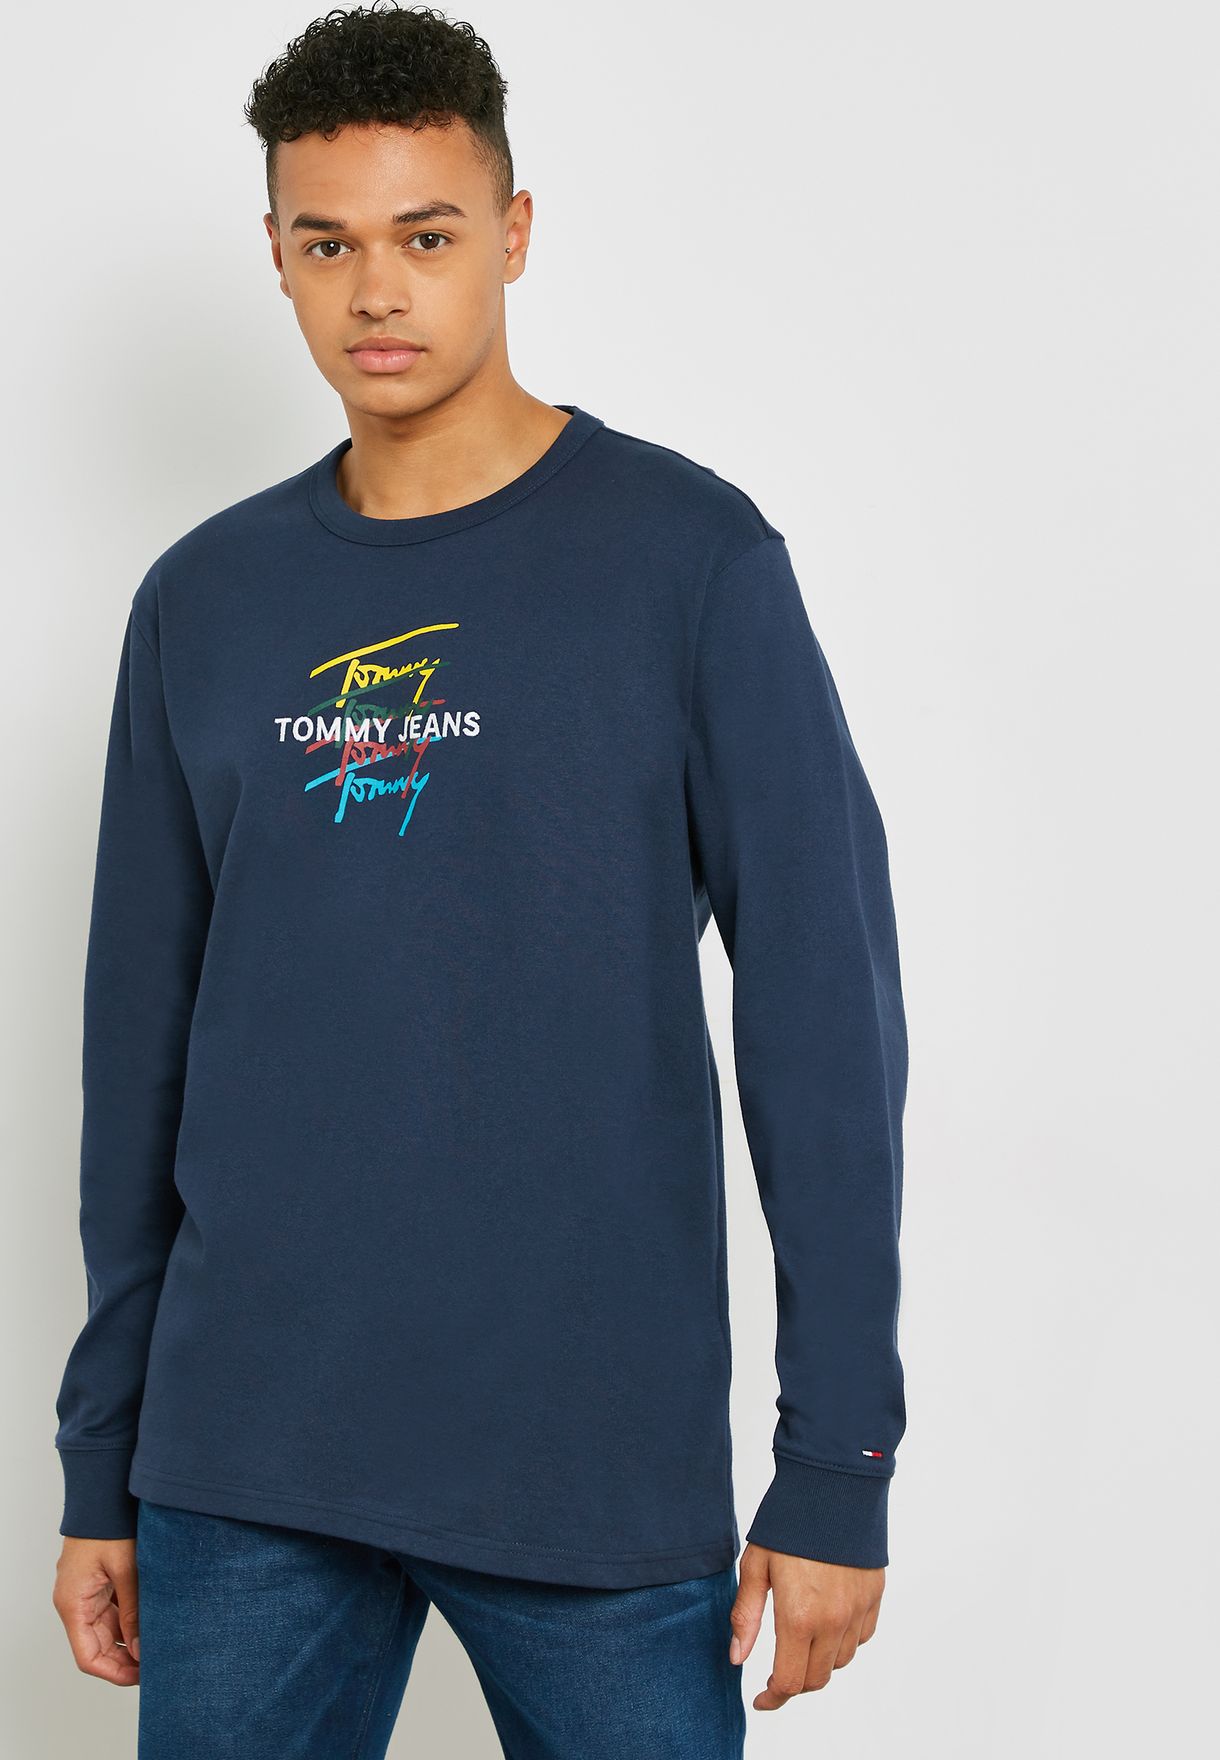 Buy Tommy Jeans navy Repeat Signature T 